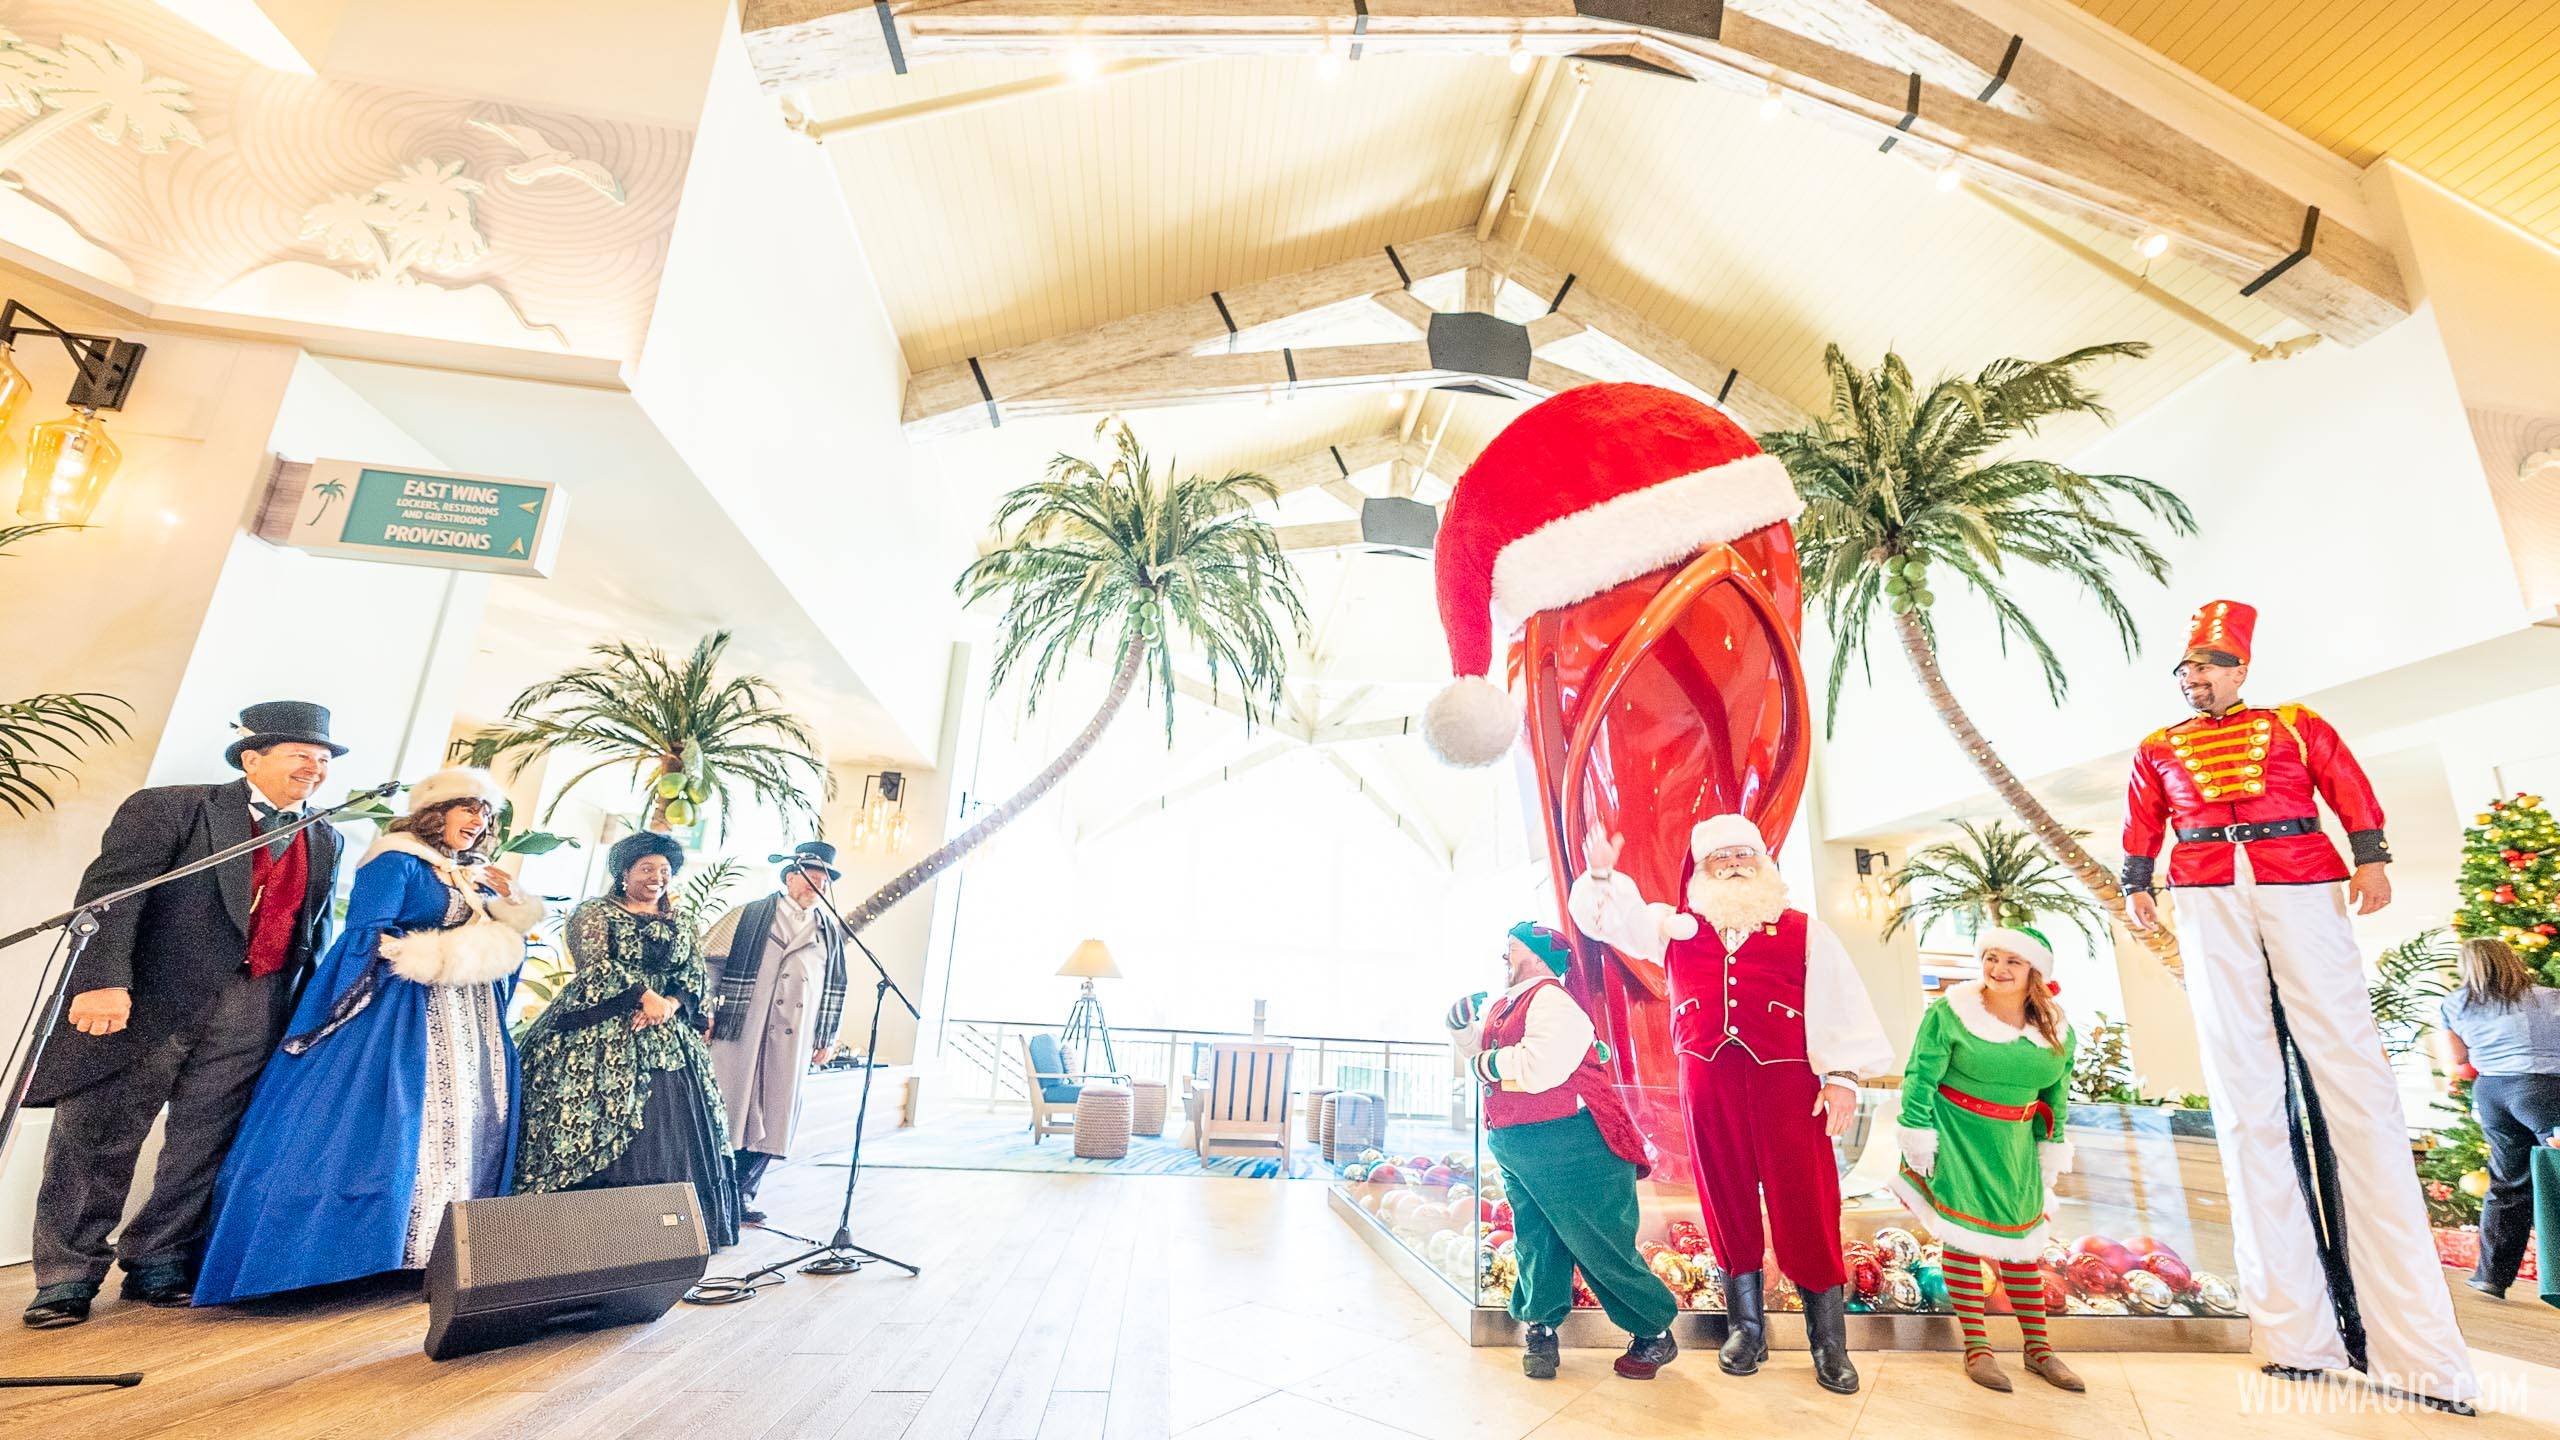 Margaritaville Orlando celebrates the holidays with a variety of events, seasonal dining, entertainment, and special resort packages